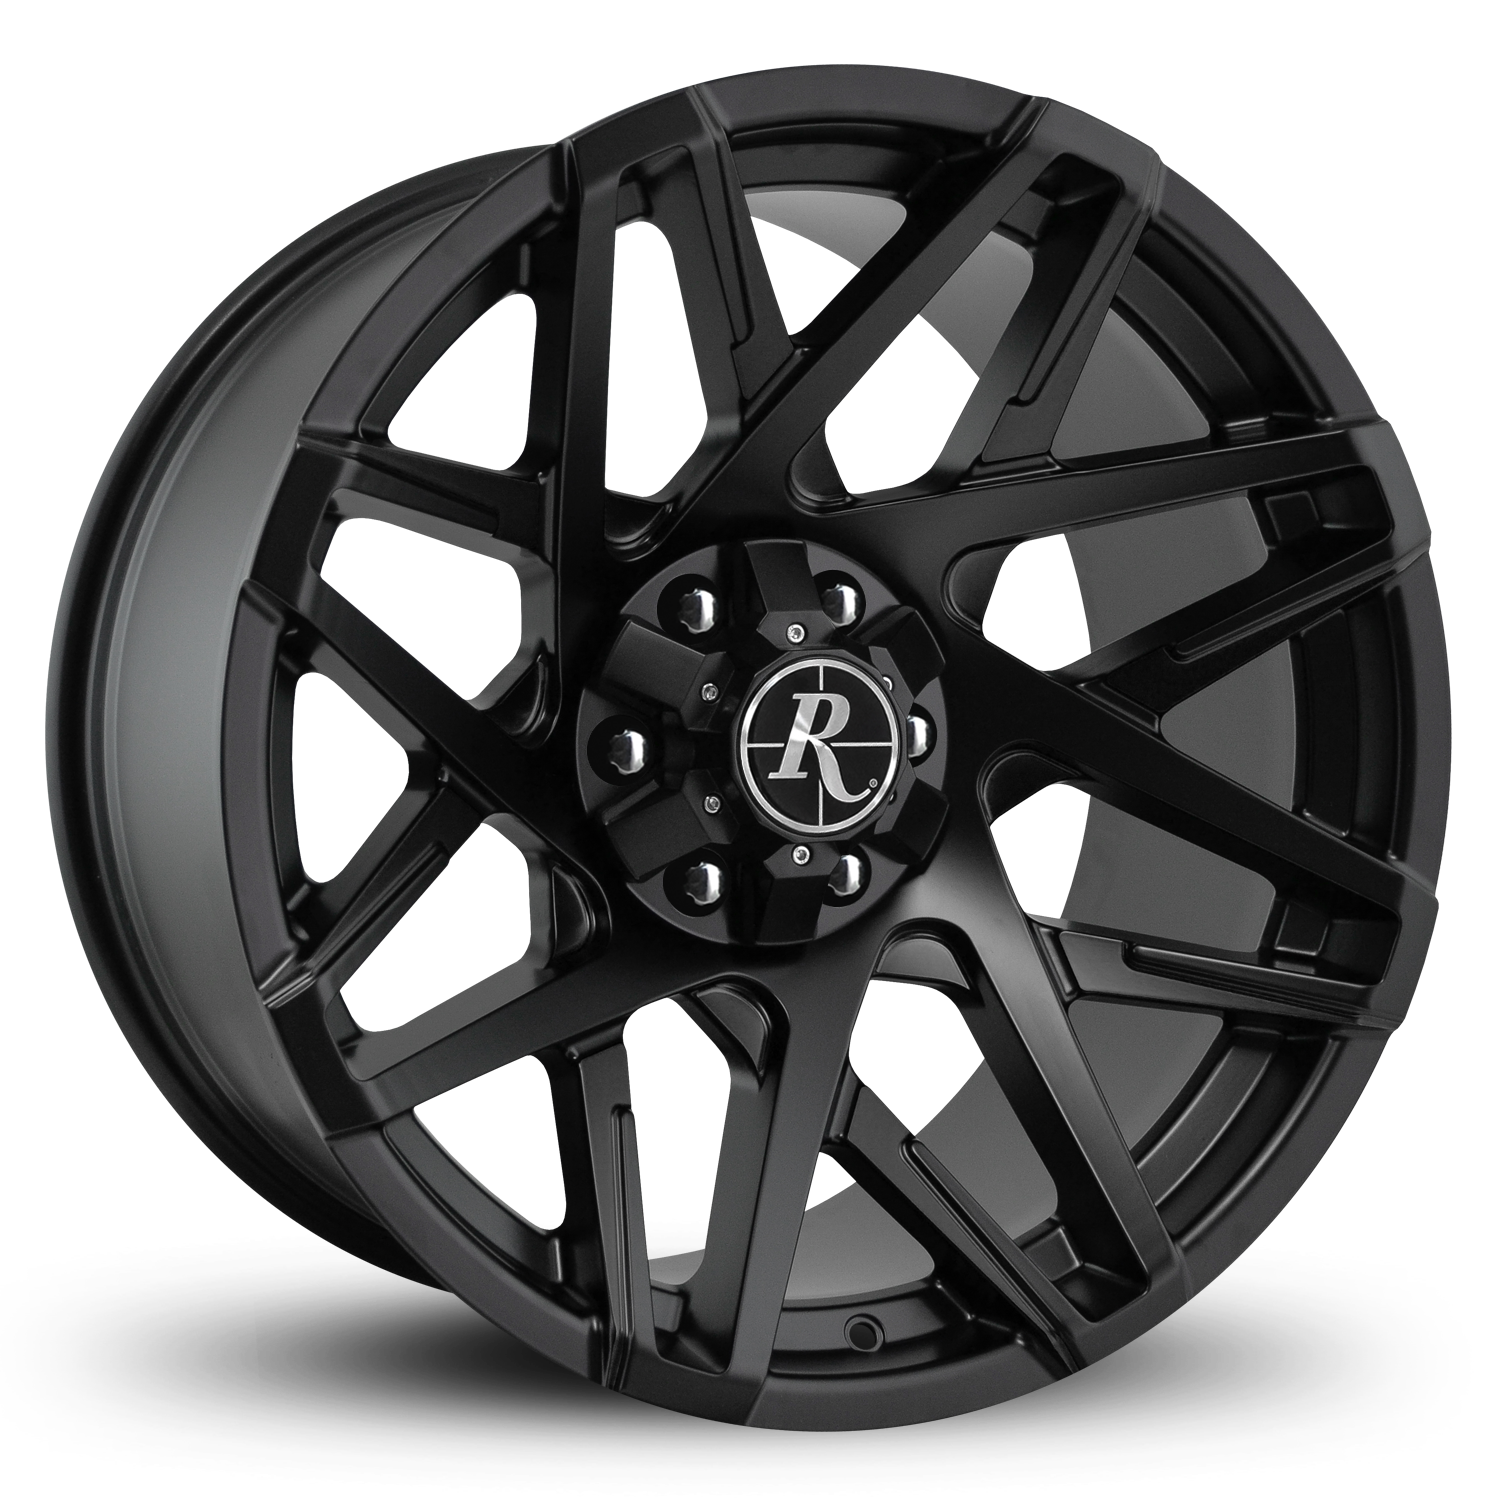 Buy Replacement Center Caps for the Remingotn Canyon Wheel Rims